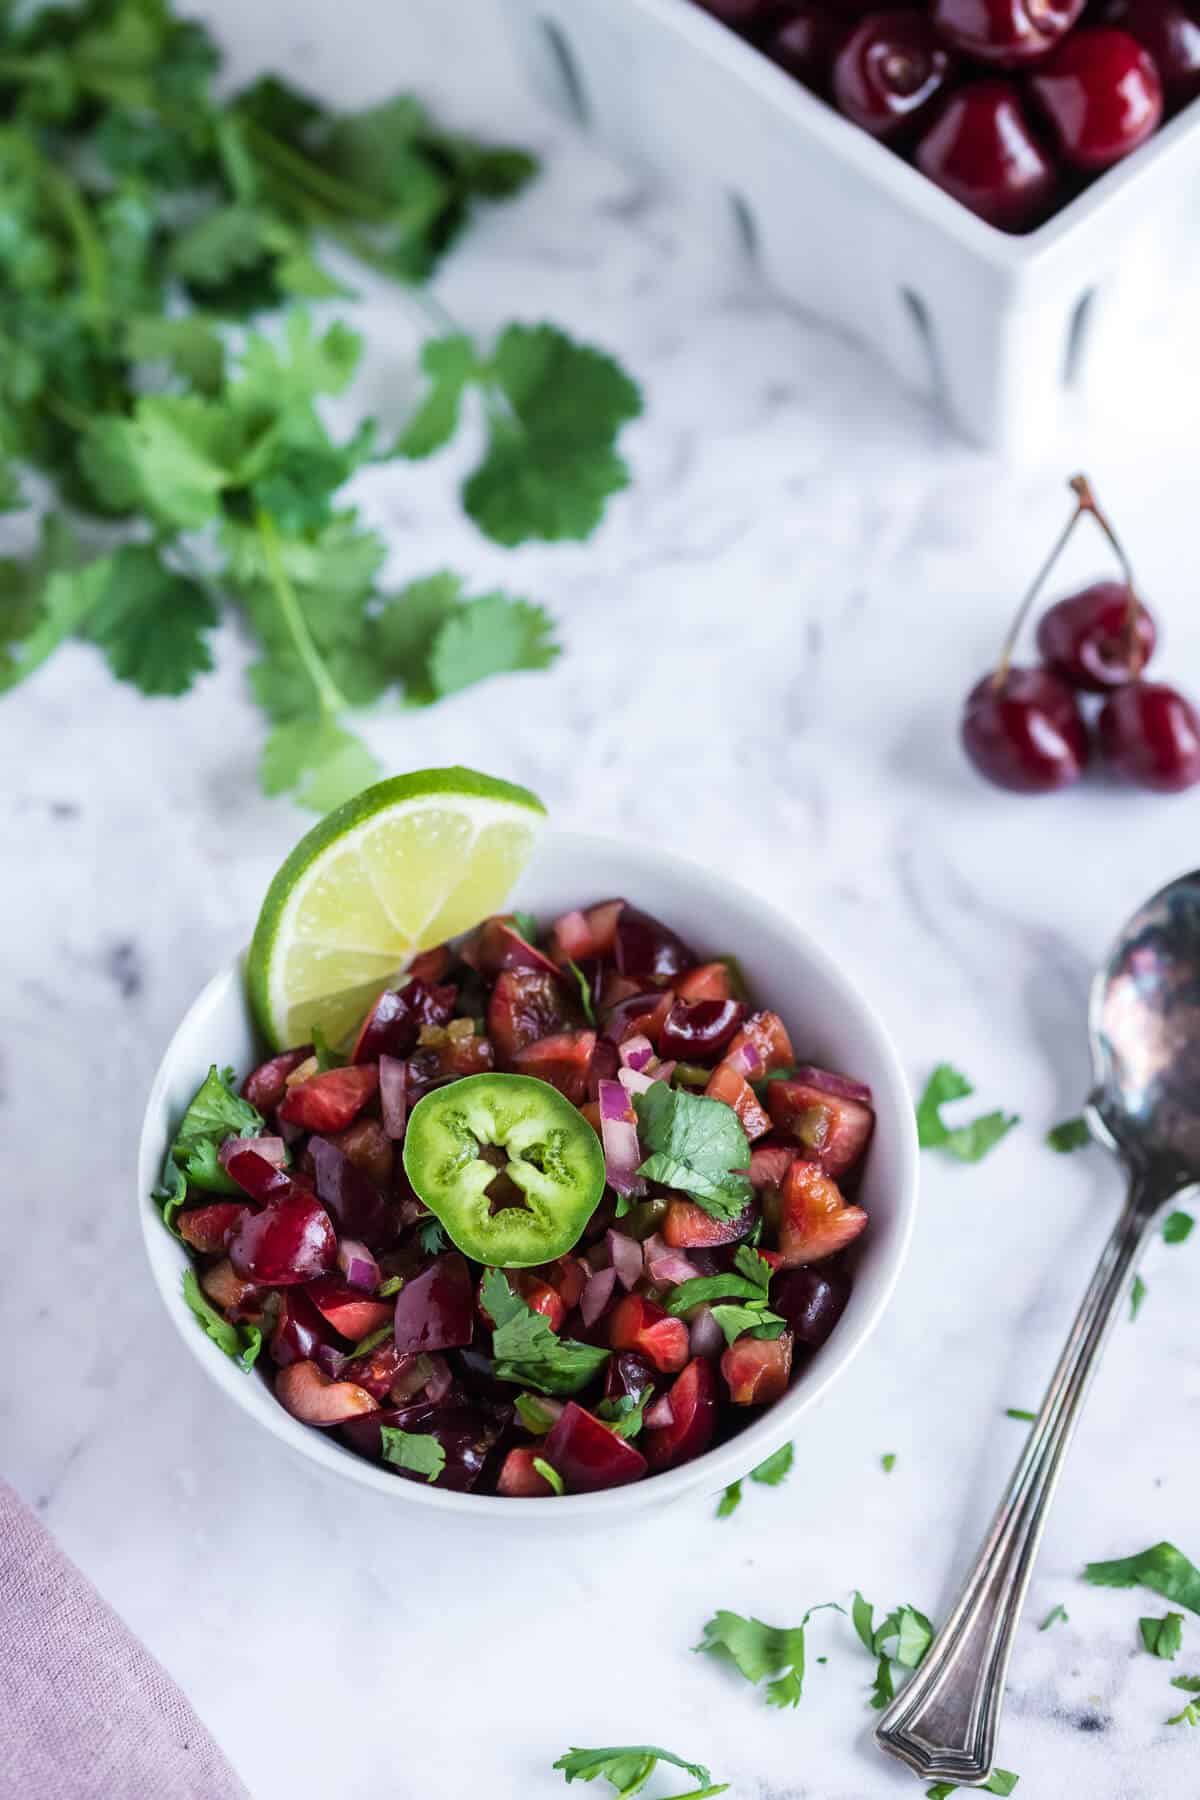 White bowl of fresh cherry salsa garnished with cilantro and a slice of jalapeno. Spoon alongside the bowl.